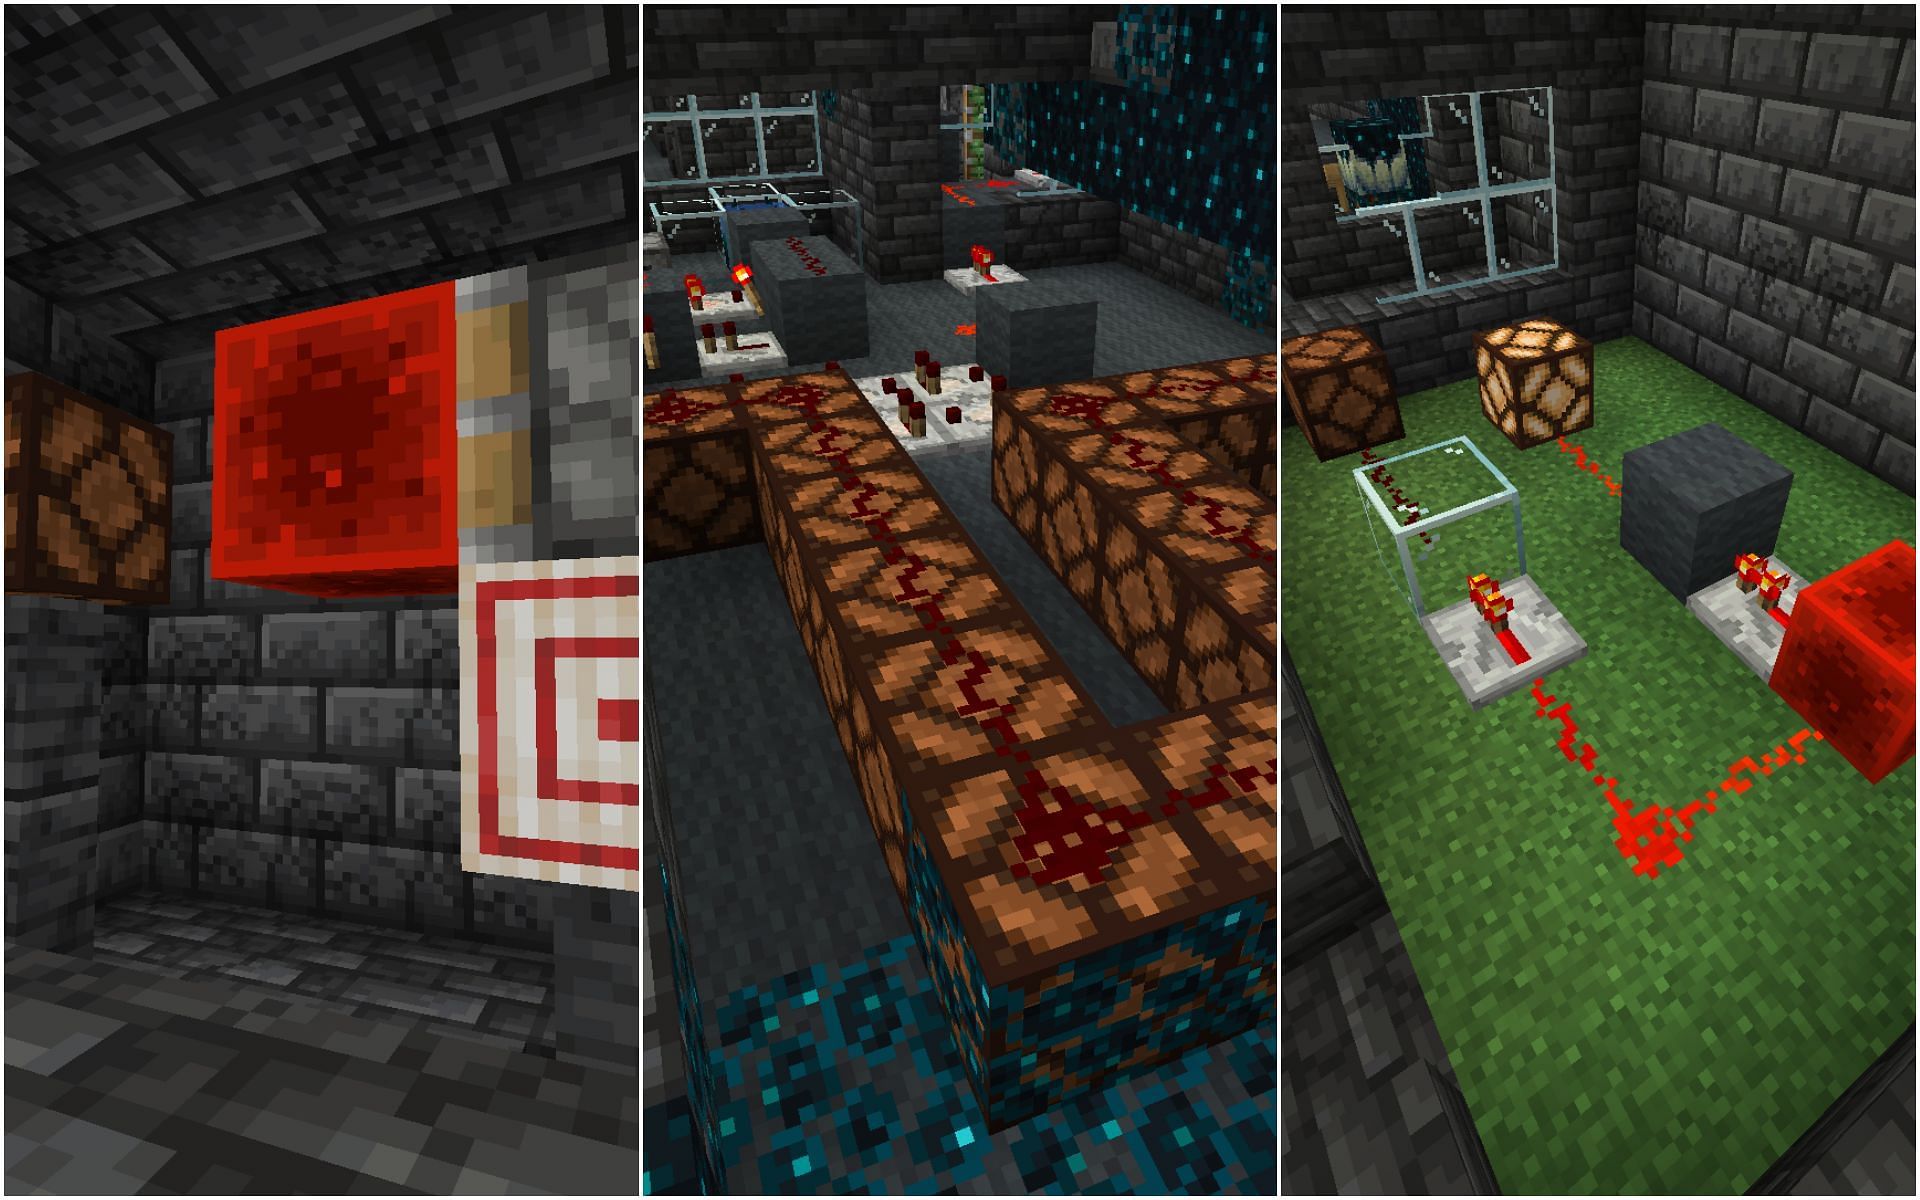 Different types of redstone contraptions in Ancient City (Image via Mojang)